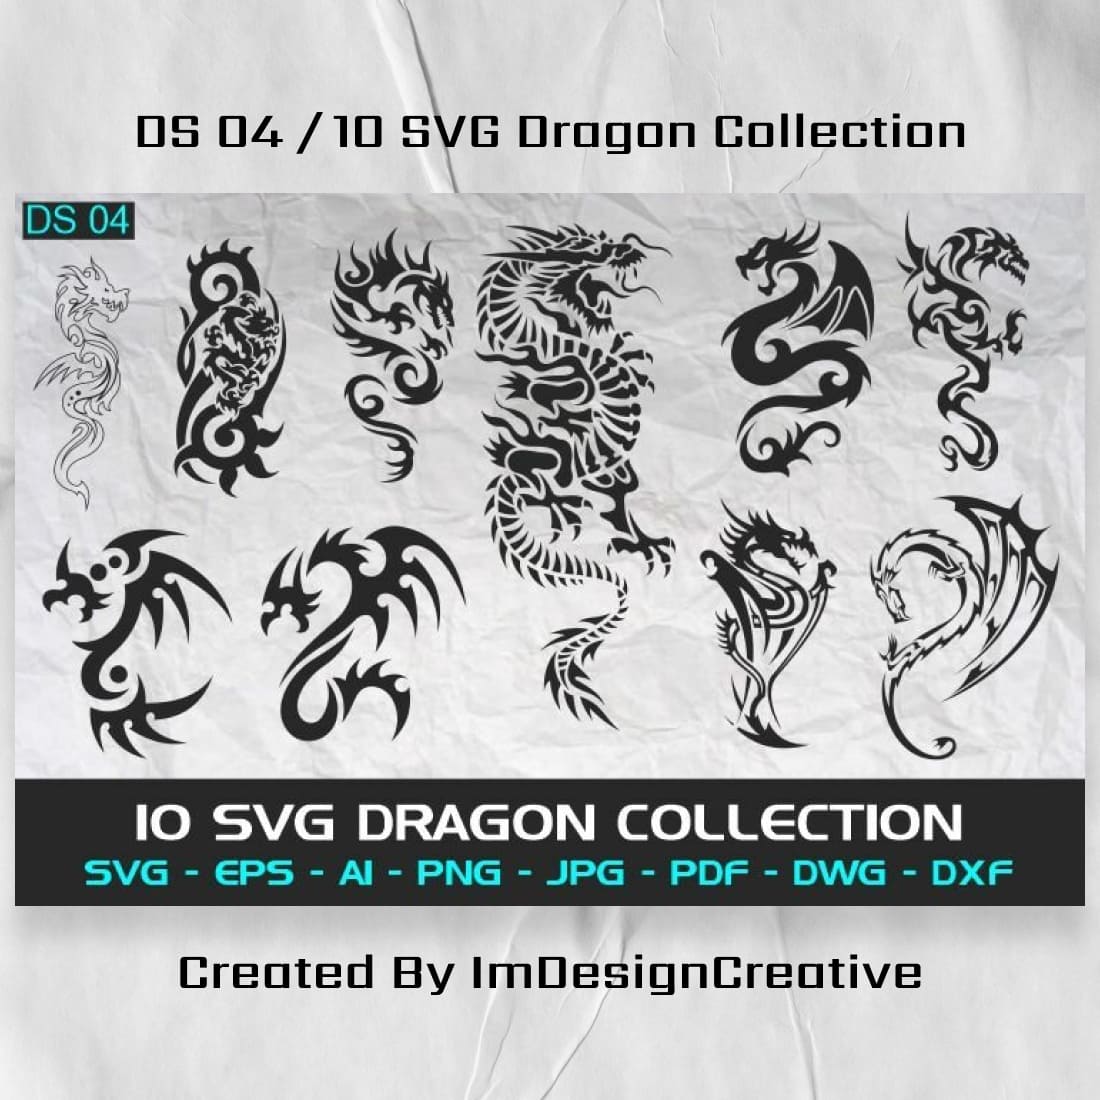 ds 04 10 svg dragon collection cover image.